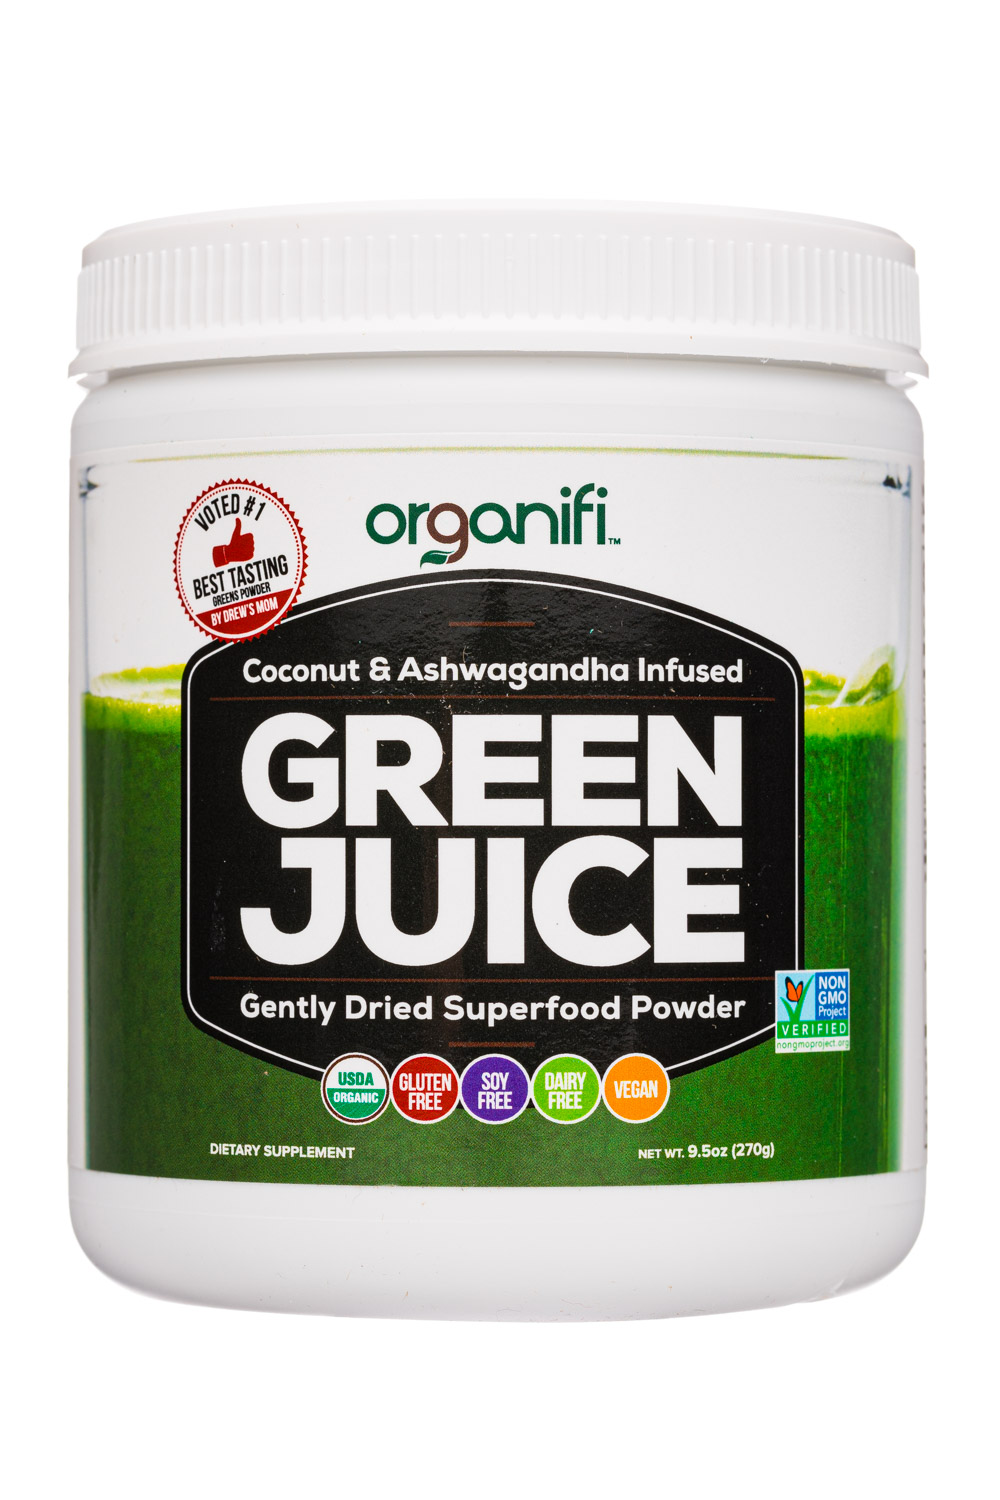 Little Known Facts About Organifi Green Juice Review (Read This Before You Buy It).